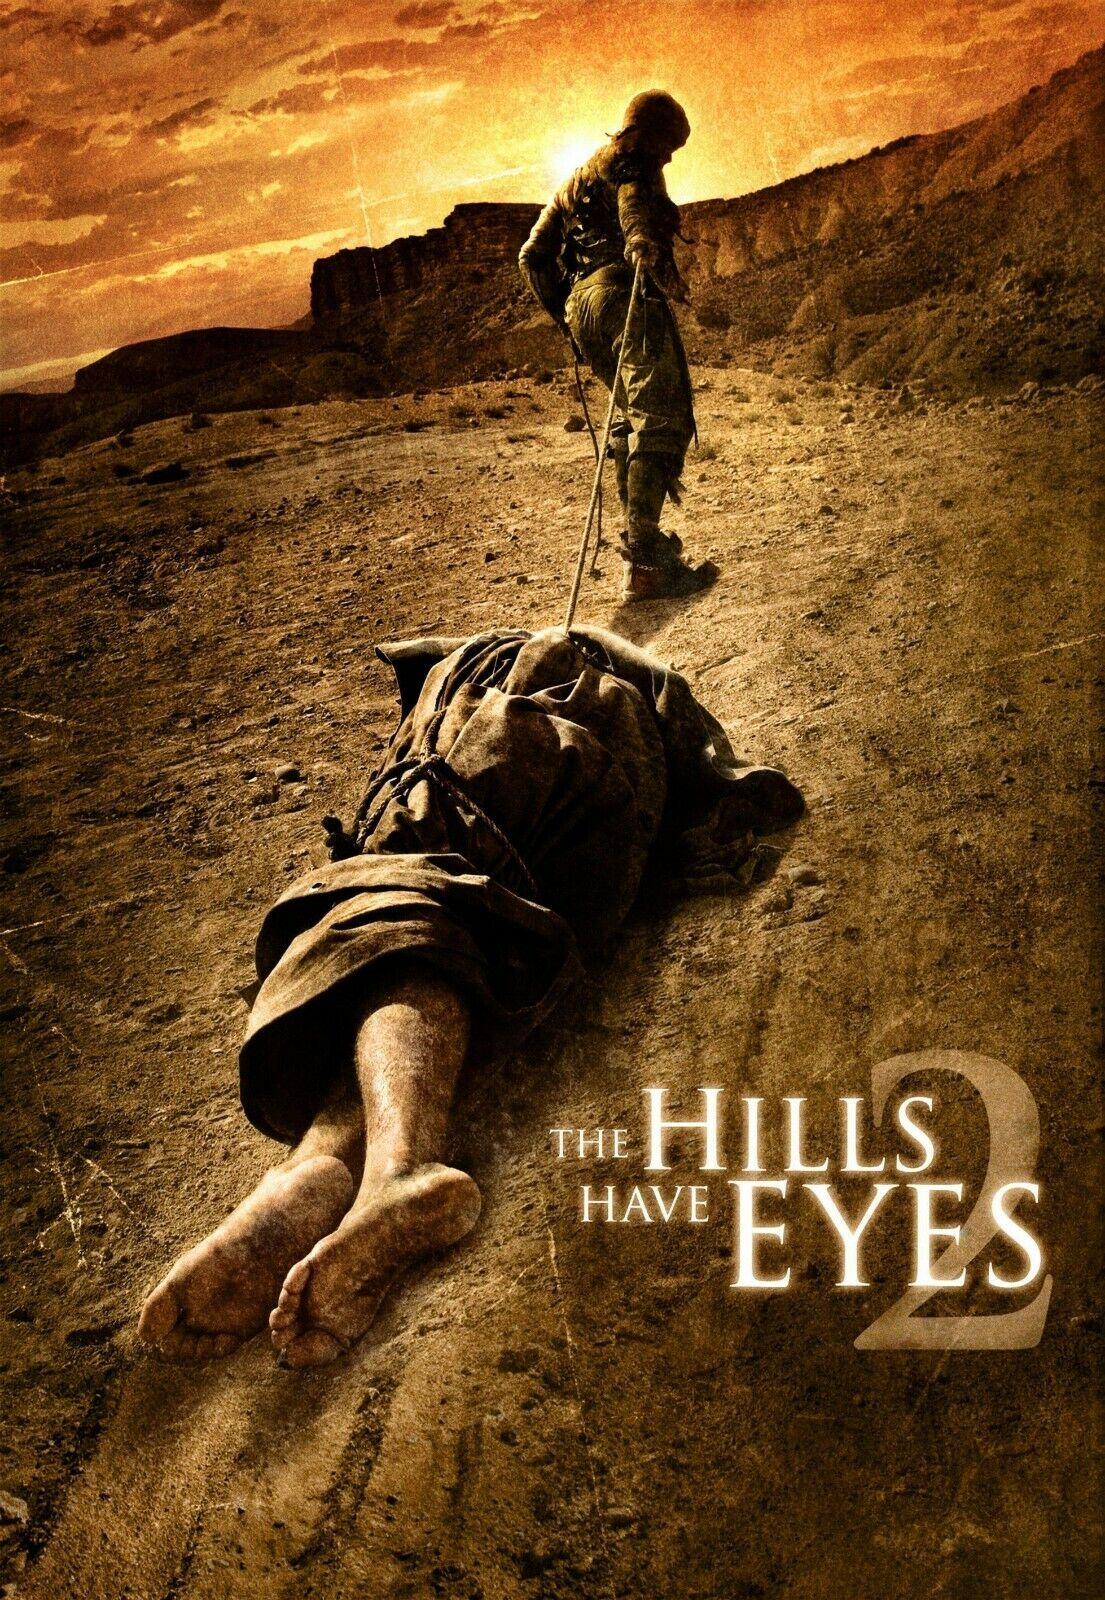 HILLS HAVE EYES 2, THE